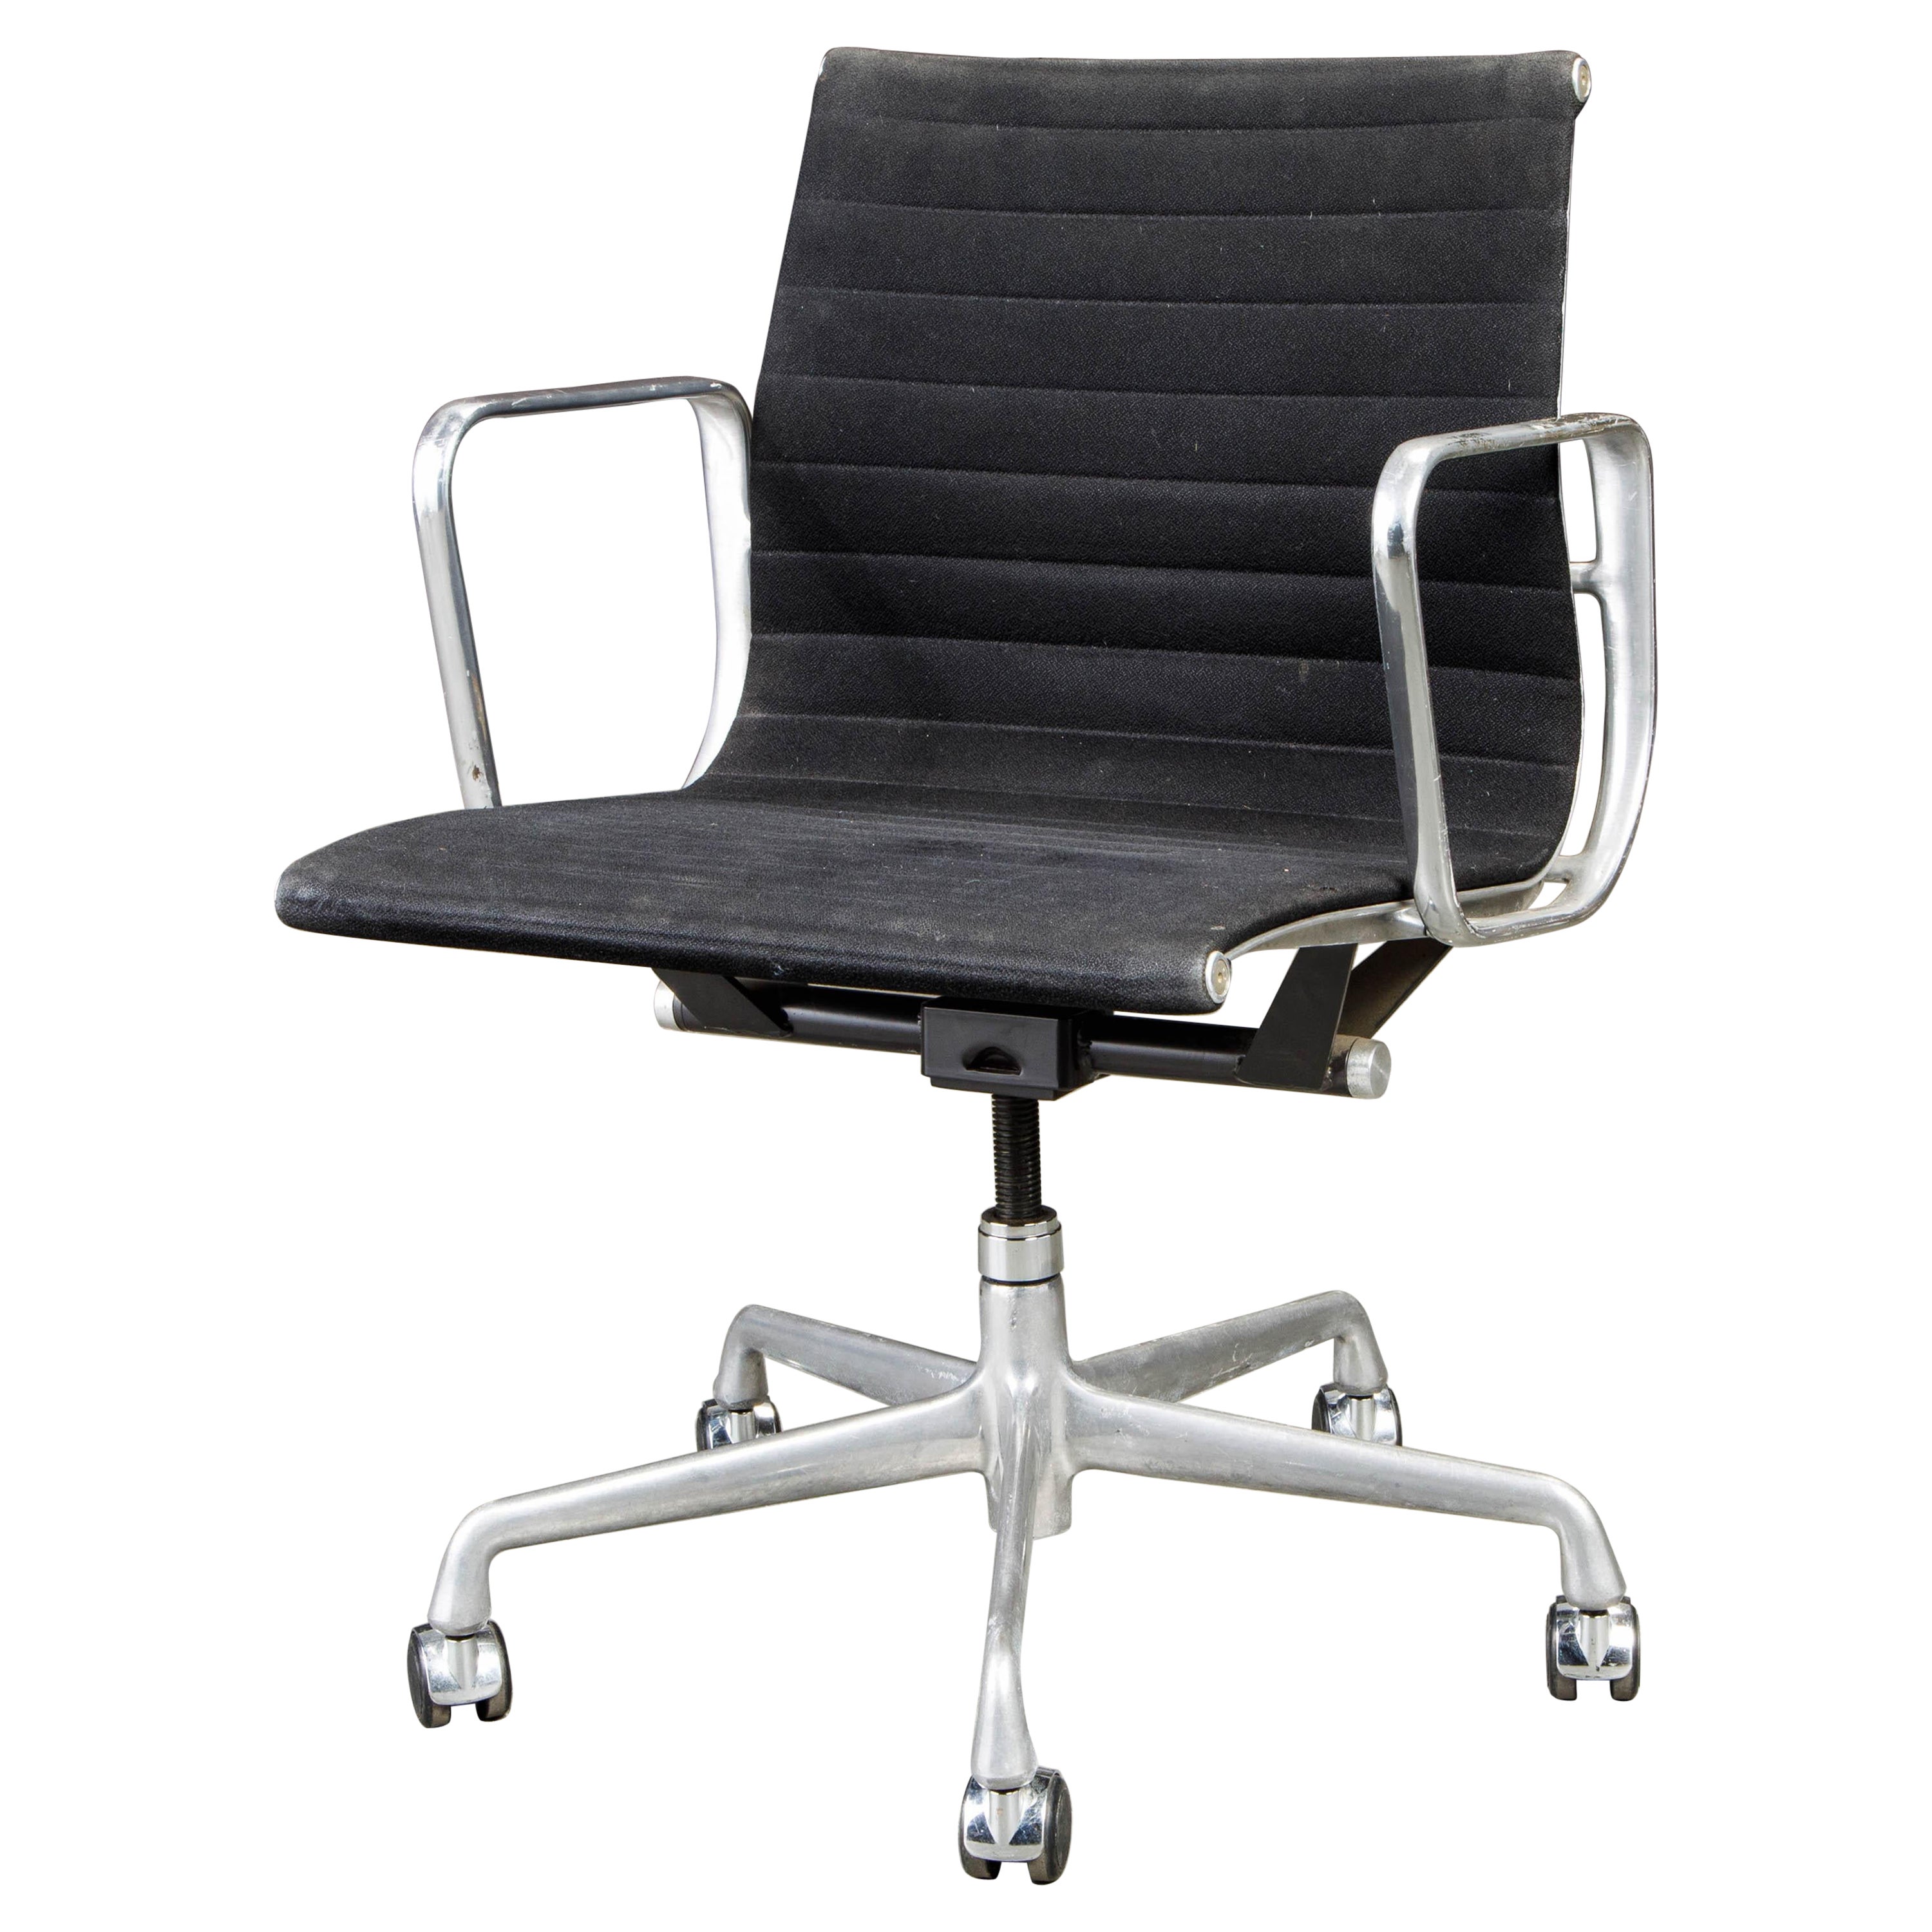 Eames Herman Miller Low Aluminum Group Executive Desk Chairs Black Leather 2006 